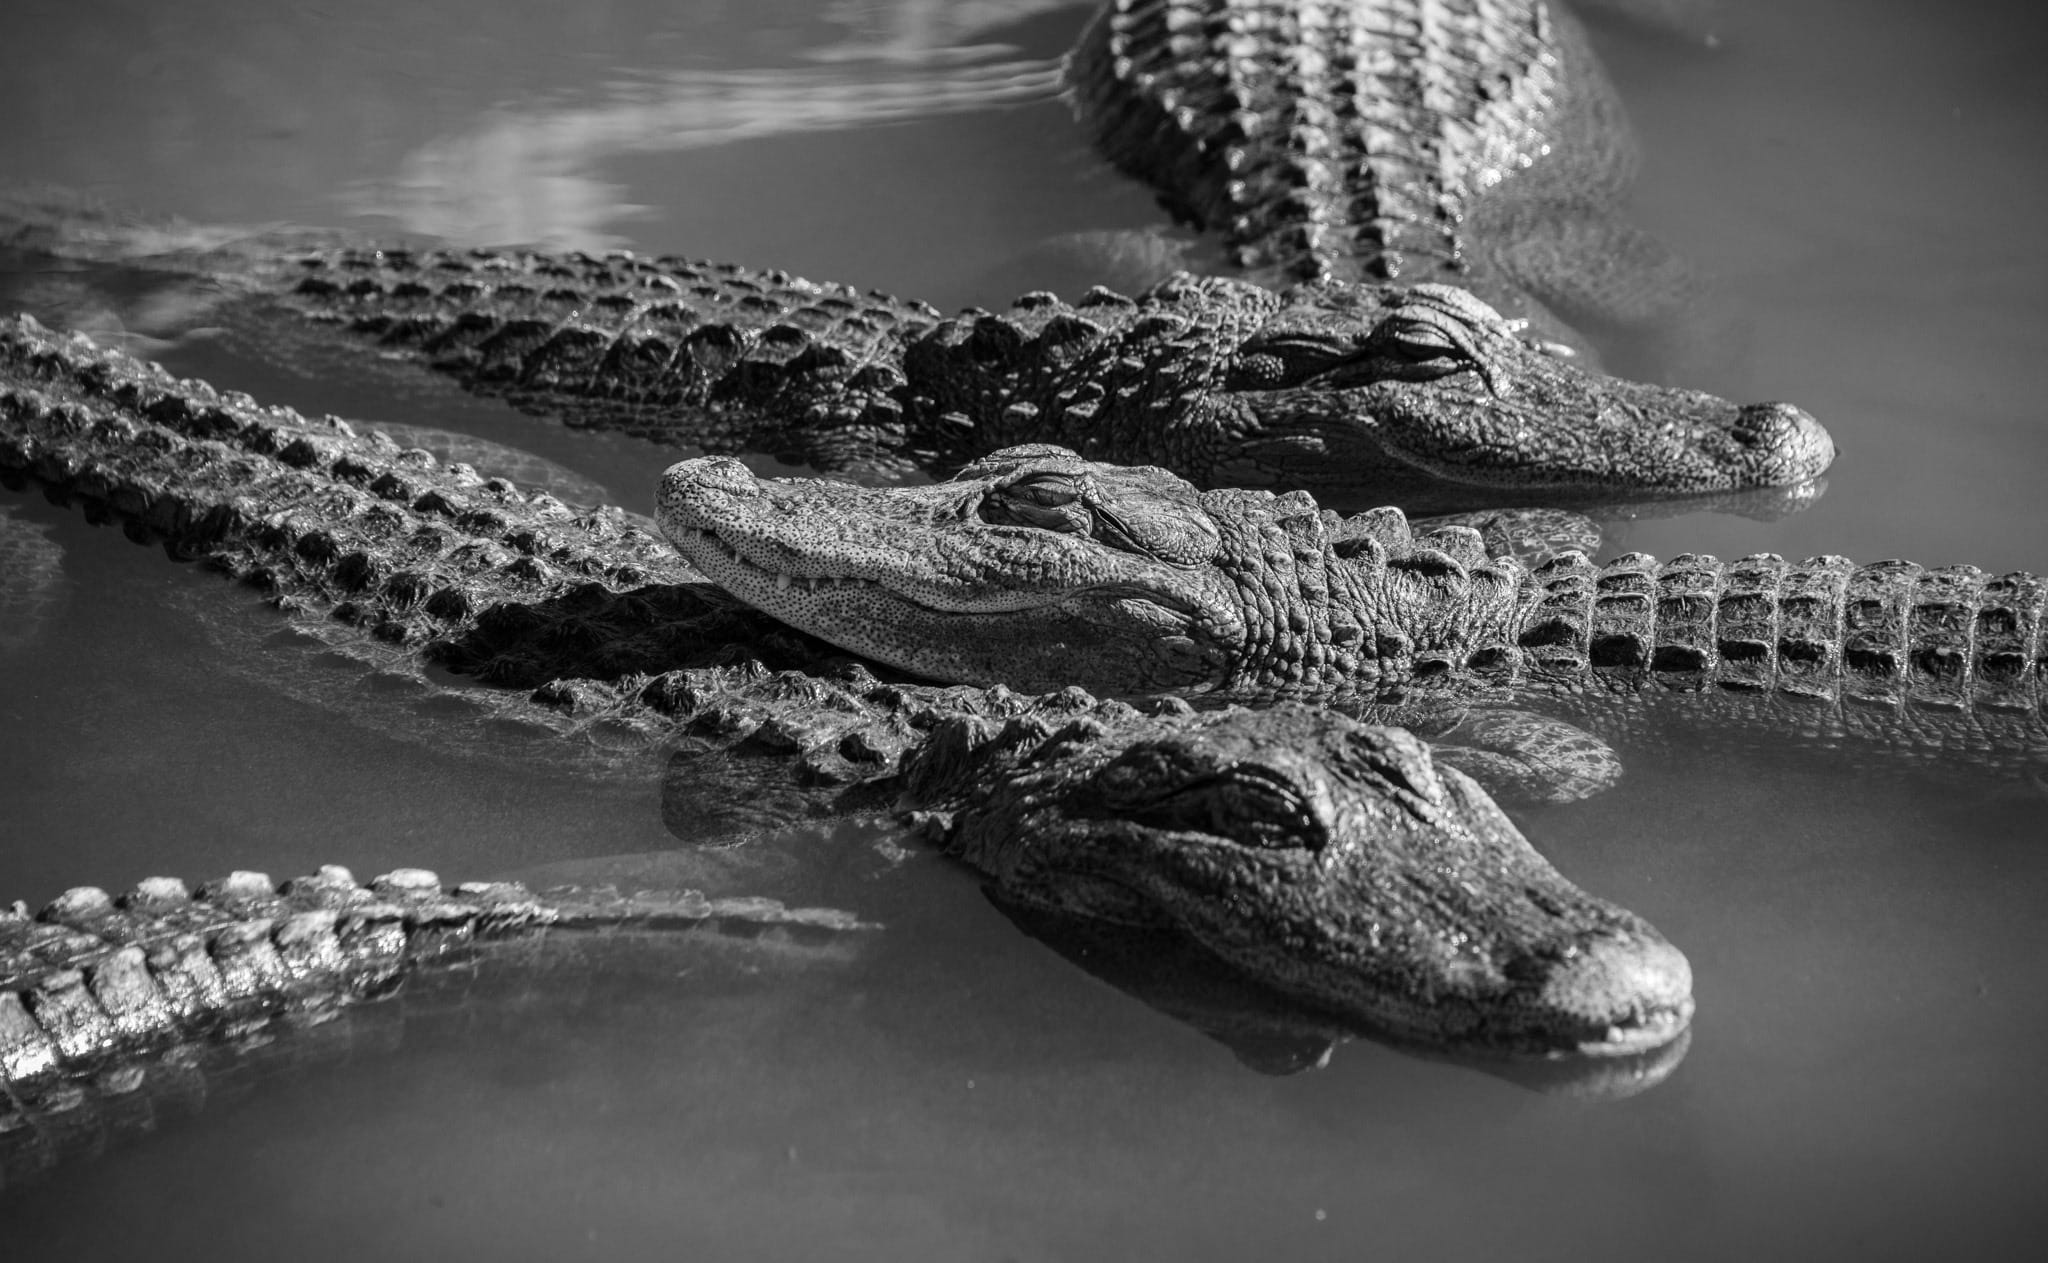 These young alligators are living in the same area within Colorado Gators near Hooper, Colorado. When they become older, it will not be safe to house them in the same enclosure because male alligators are very territorial.